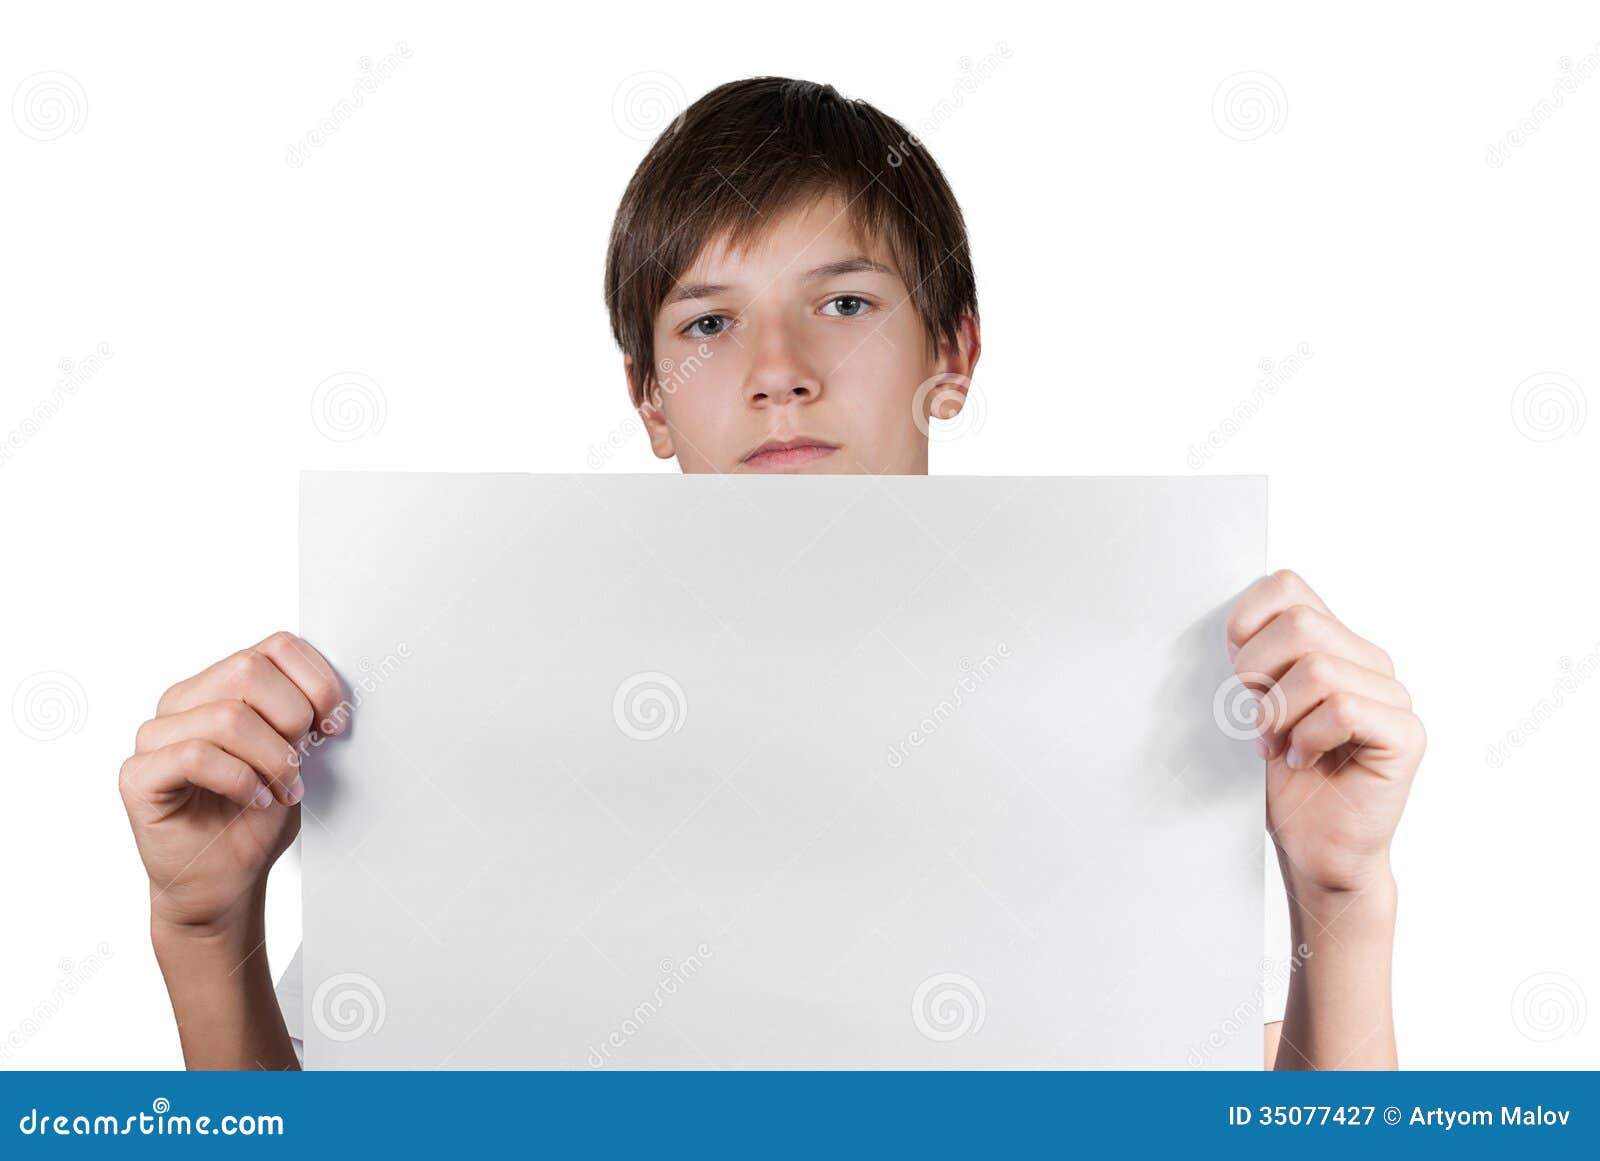 Smart boy with sheet of paper isolated on white. This image has attached release.